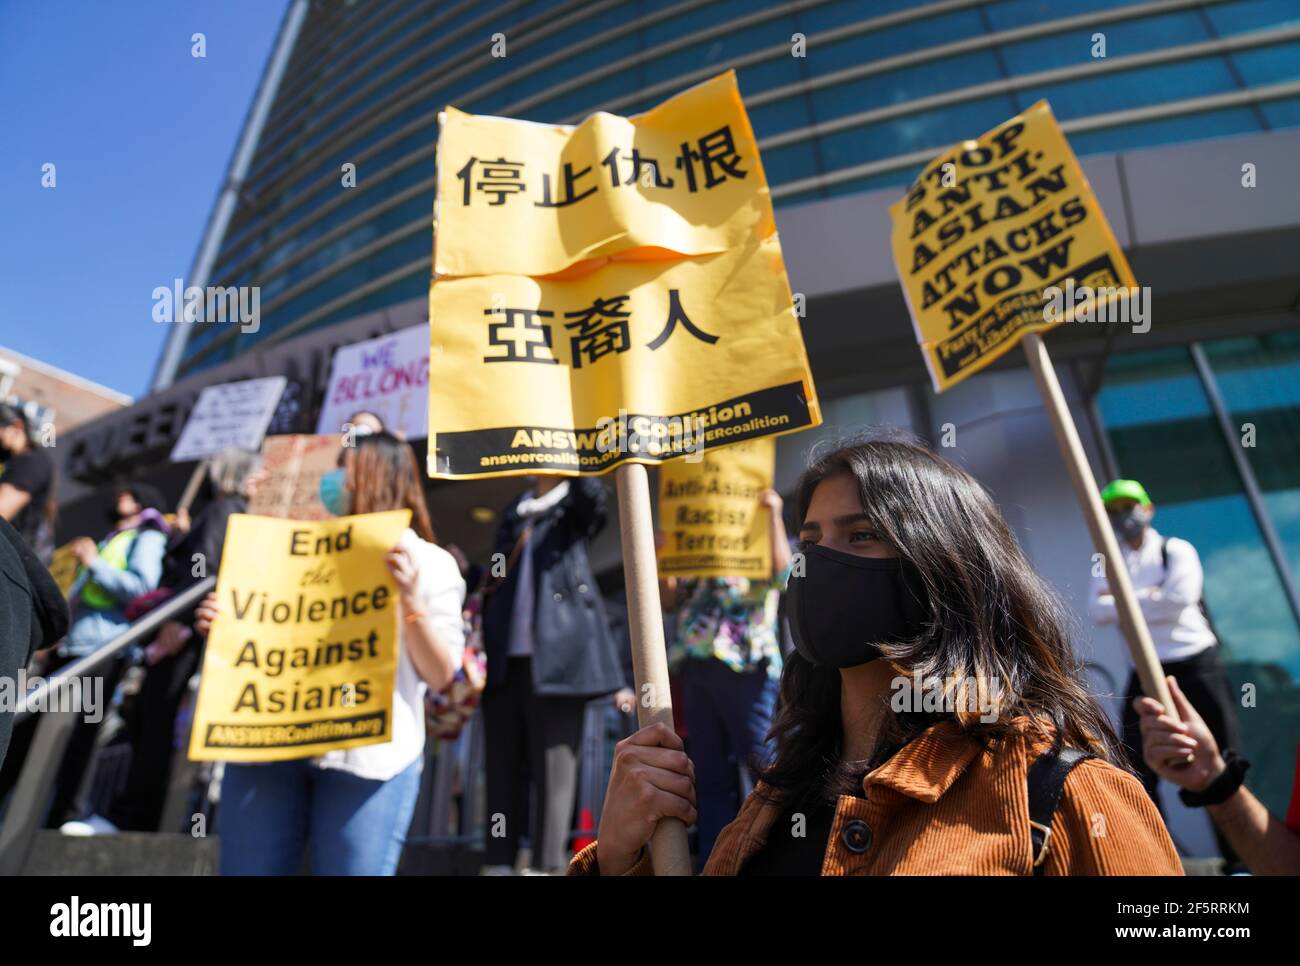 New York, USA. 27th Mar, 2021. People attend a rally against racism and violence on Asian Americans in Flushing of New York, the United States, March 27, 2021. Credit: Wang Ying/Xinhua/Alamy Live News Stock Photo